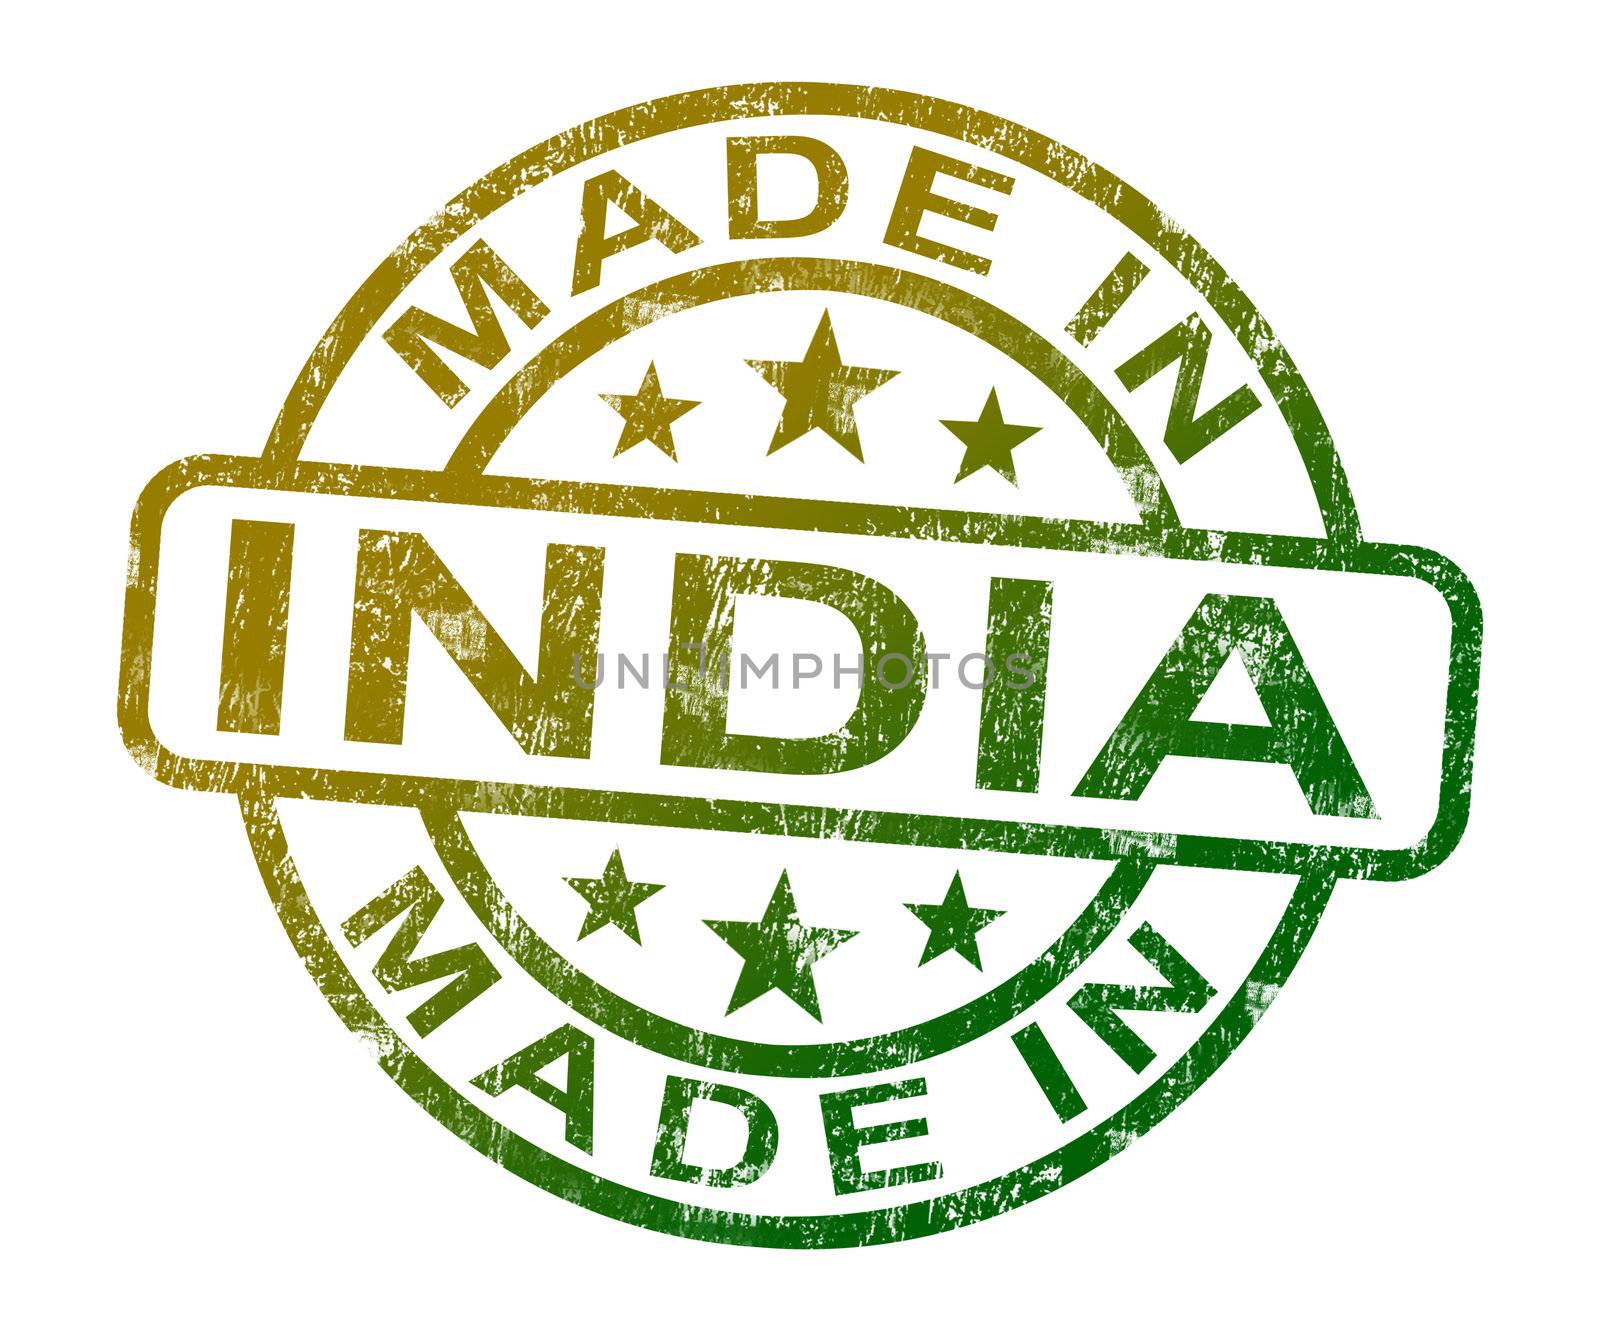 Made In India Stamp Shows Indian Product Or Produce by stuartmiles